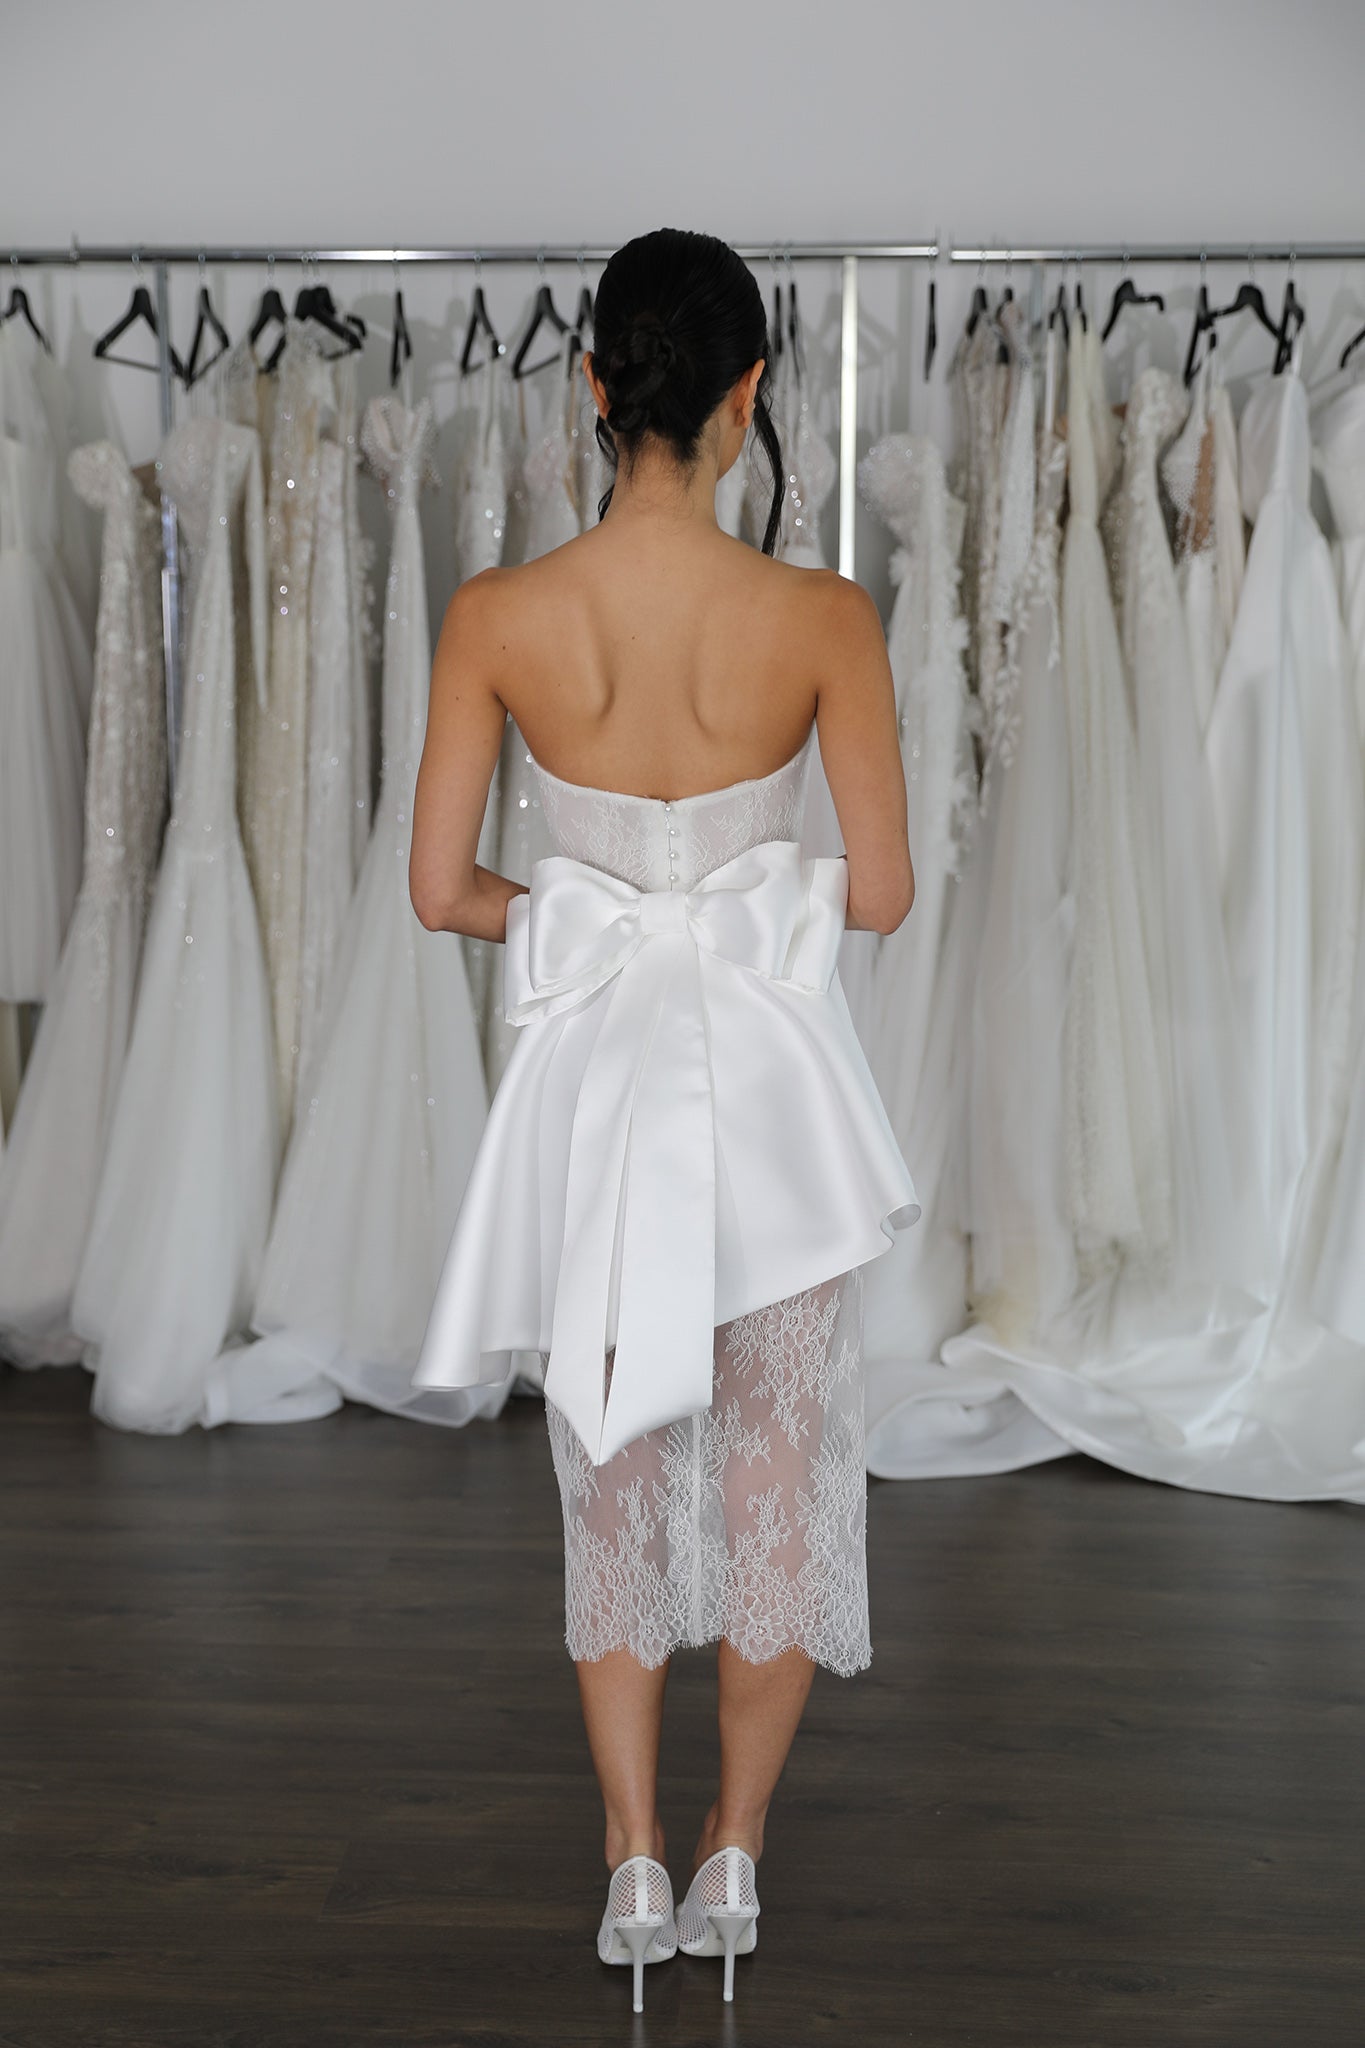 mikado and lace wedding dress with double bow back